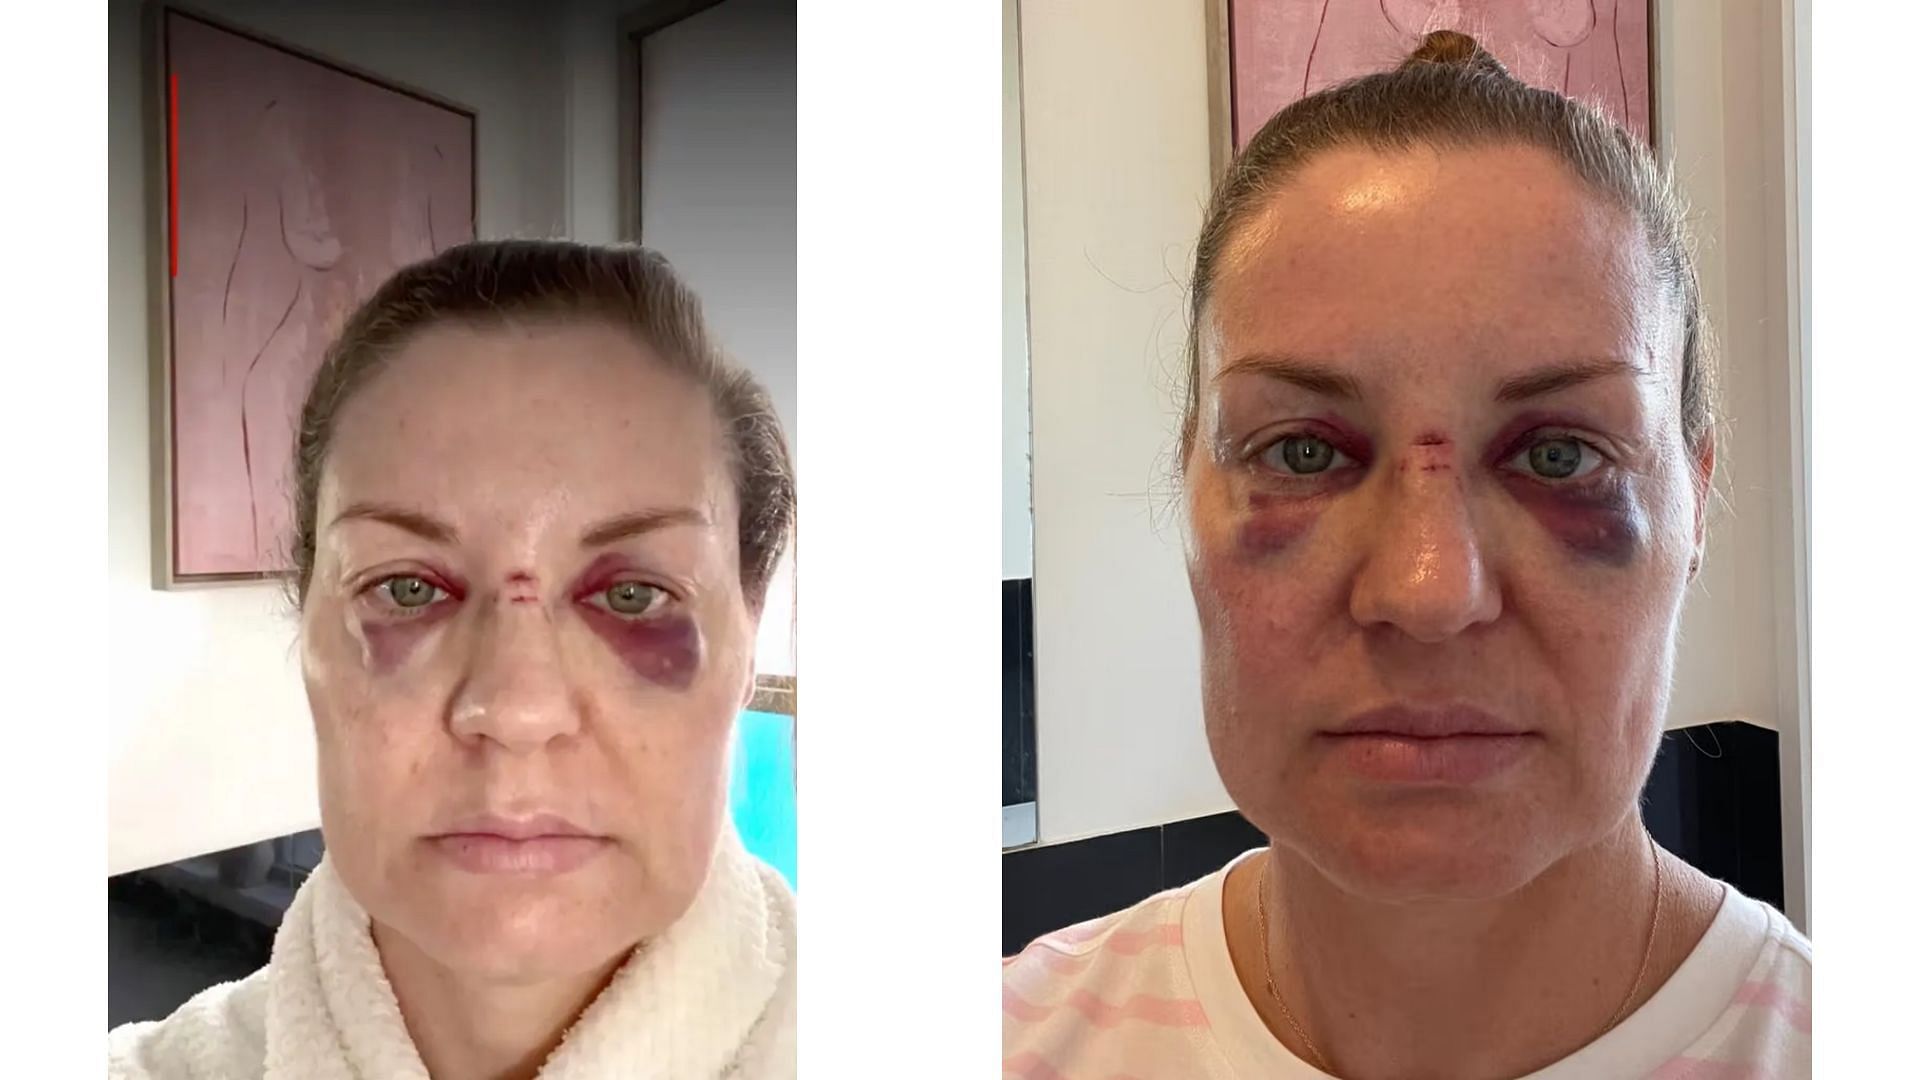 Rebecca Howe shared images of her face post injury (Image via TikTok)